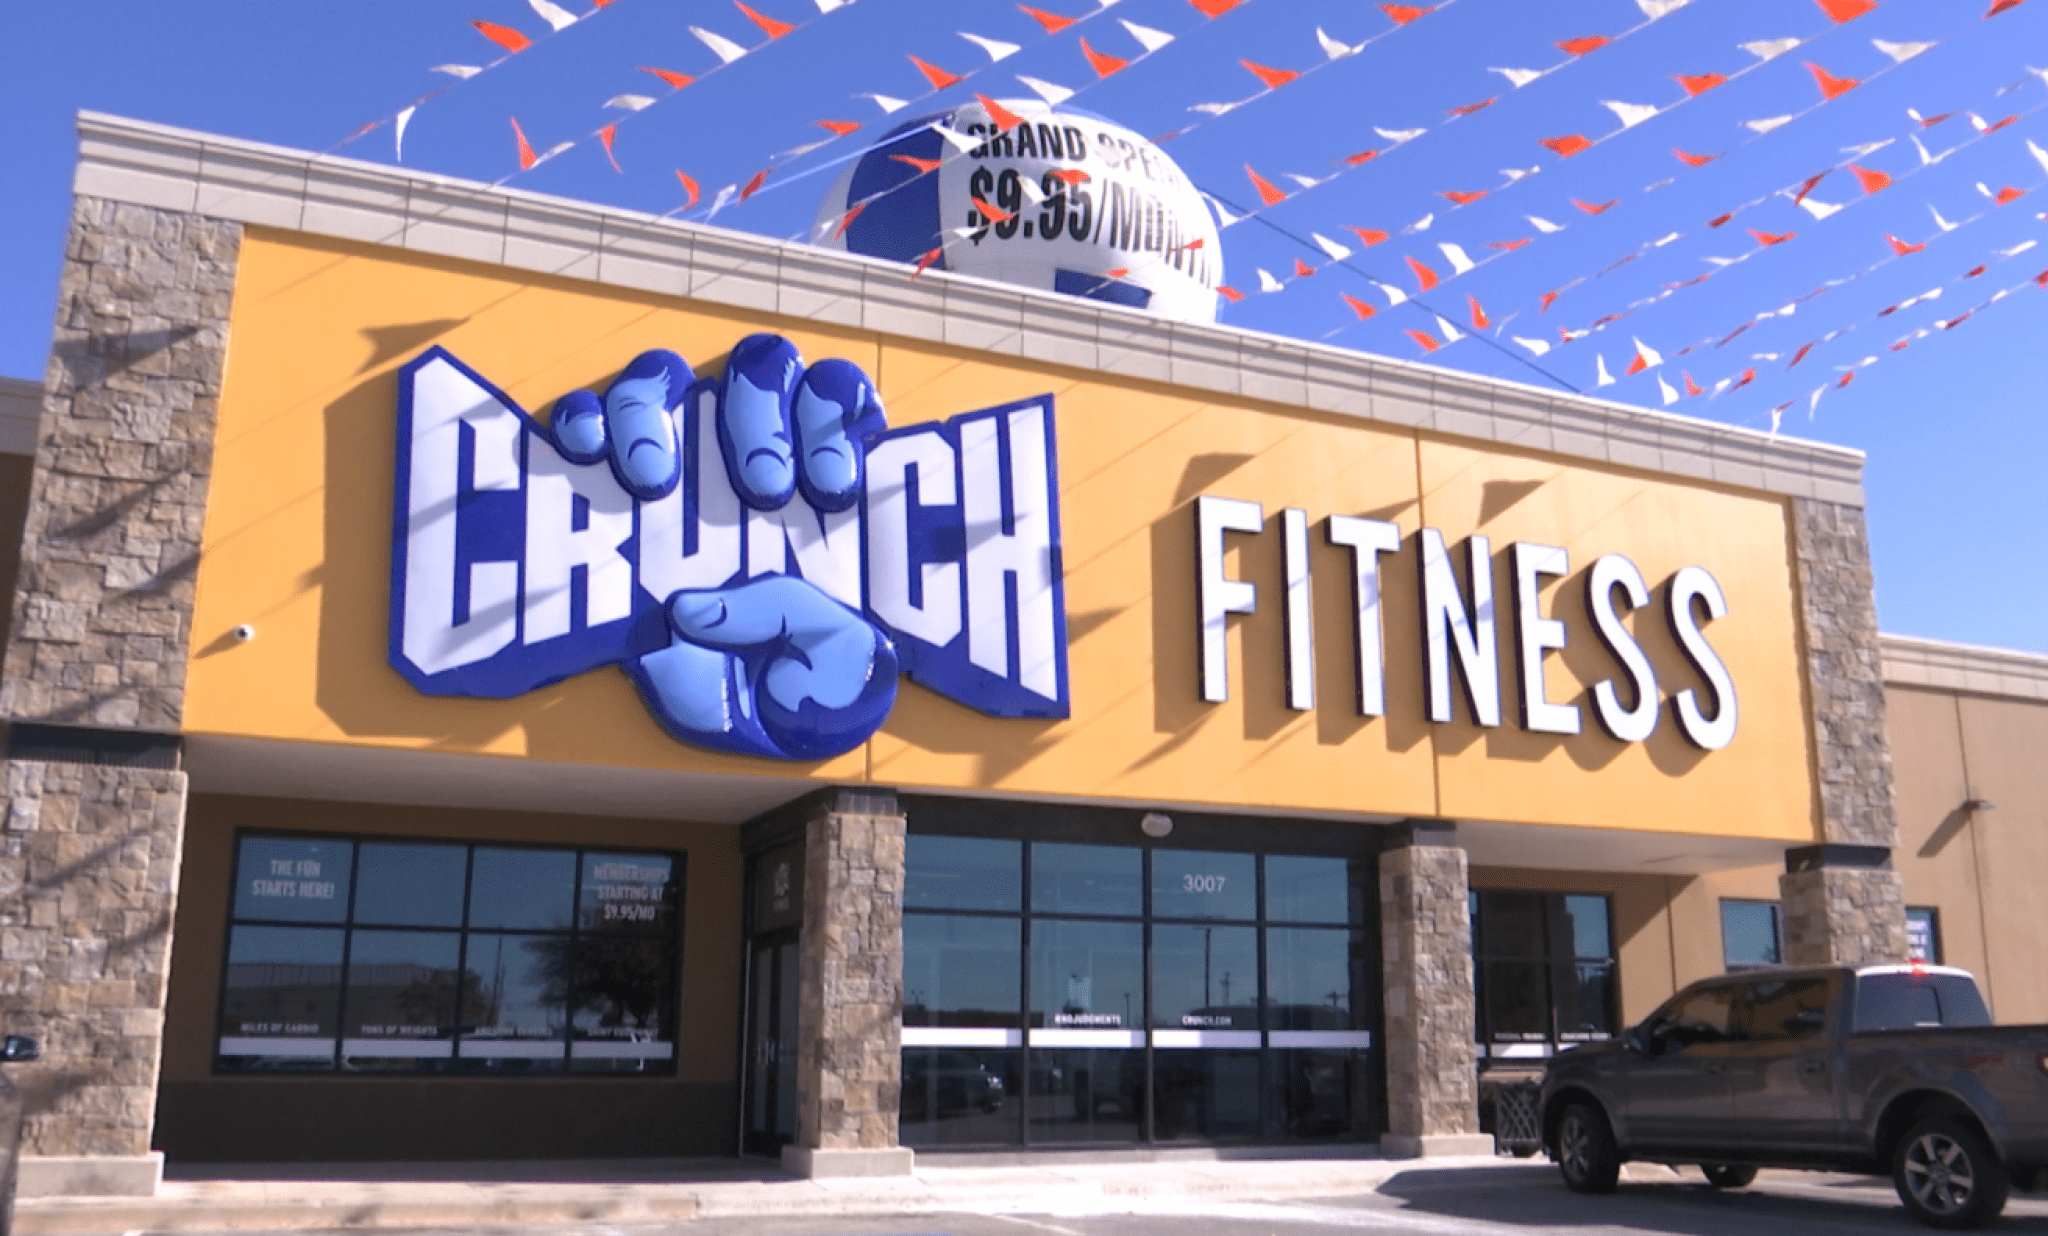 crunch fitness membership used across different locations